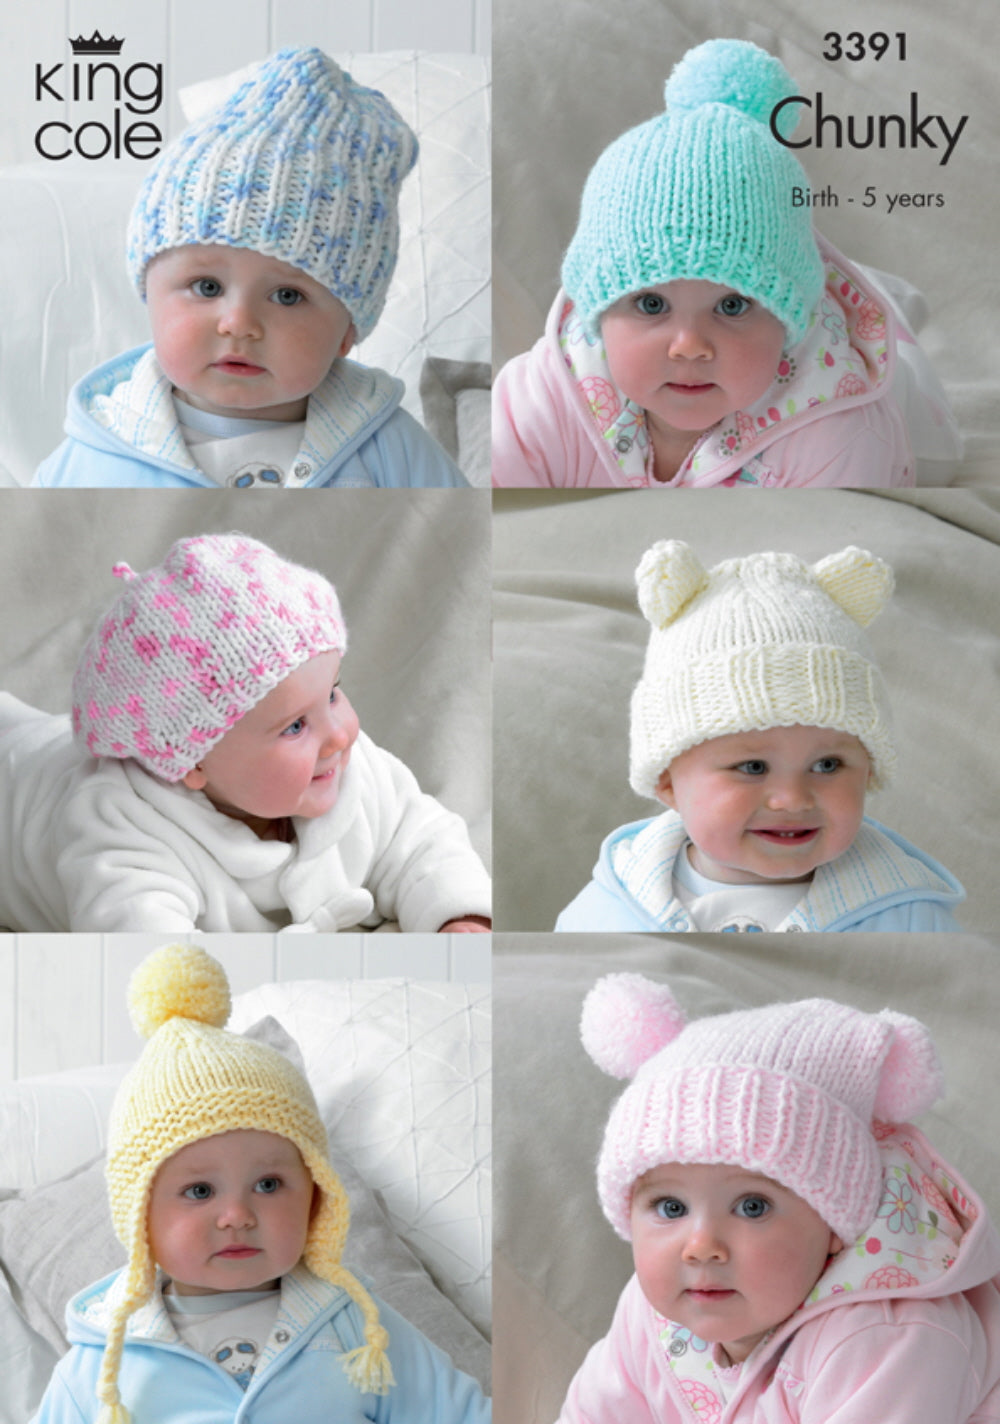 King Cole 3391 Baby Child Chunky Hat Knitting Pattern